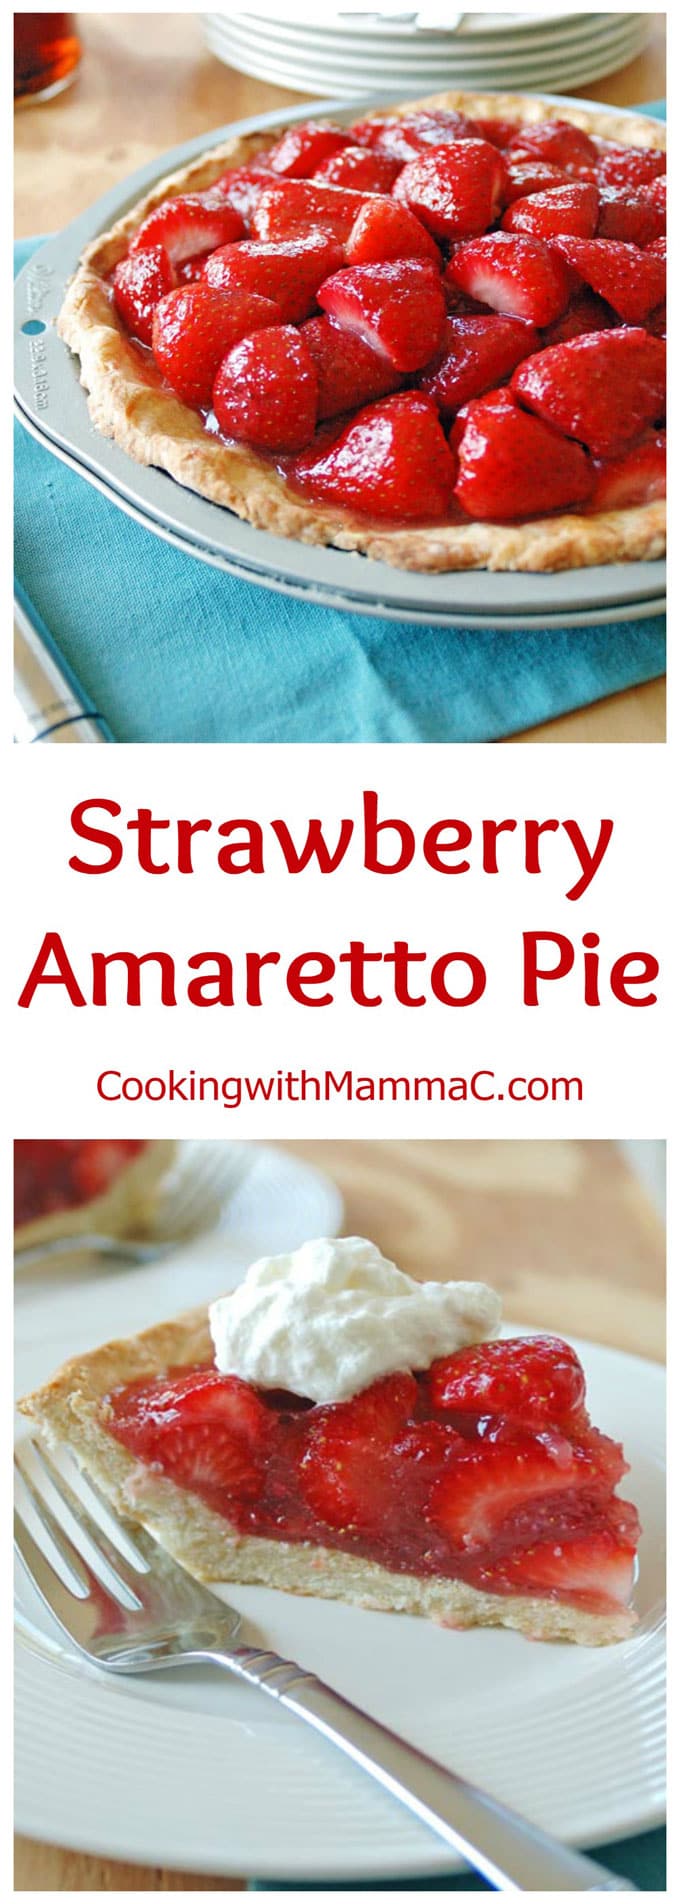 Two photos of Strawberry Amaretto Pie with the title in red and the Cooking with Mamma C URL